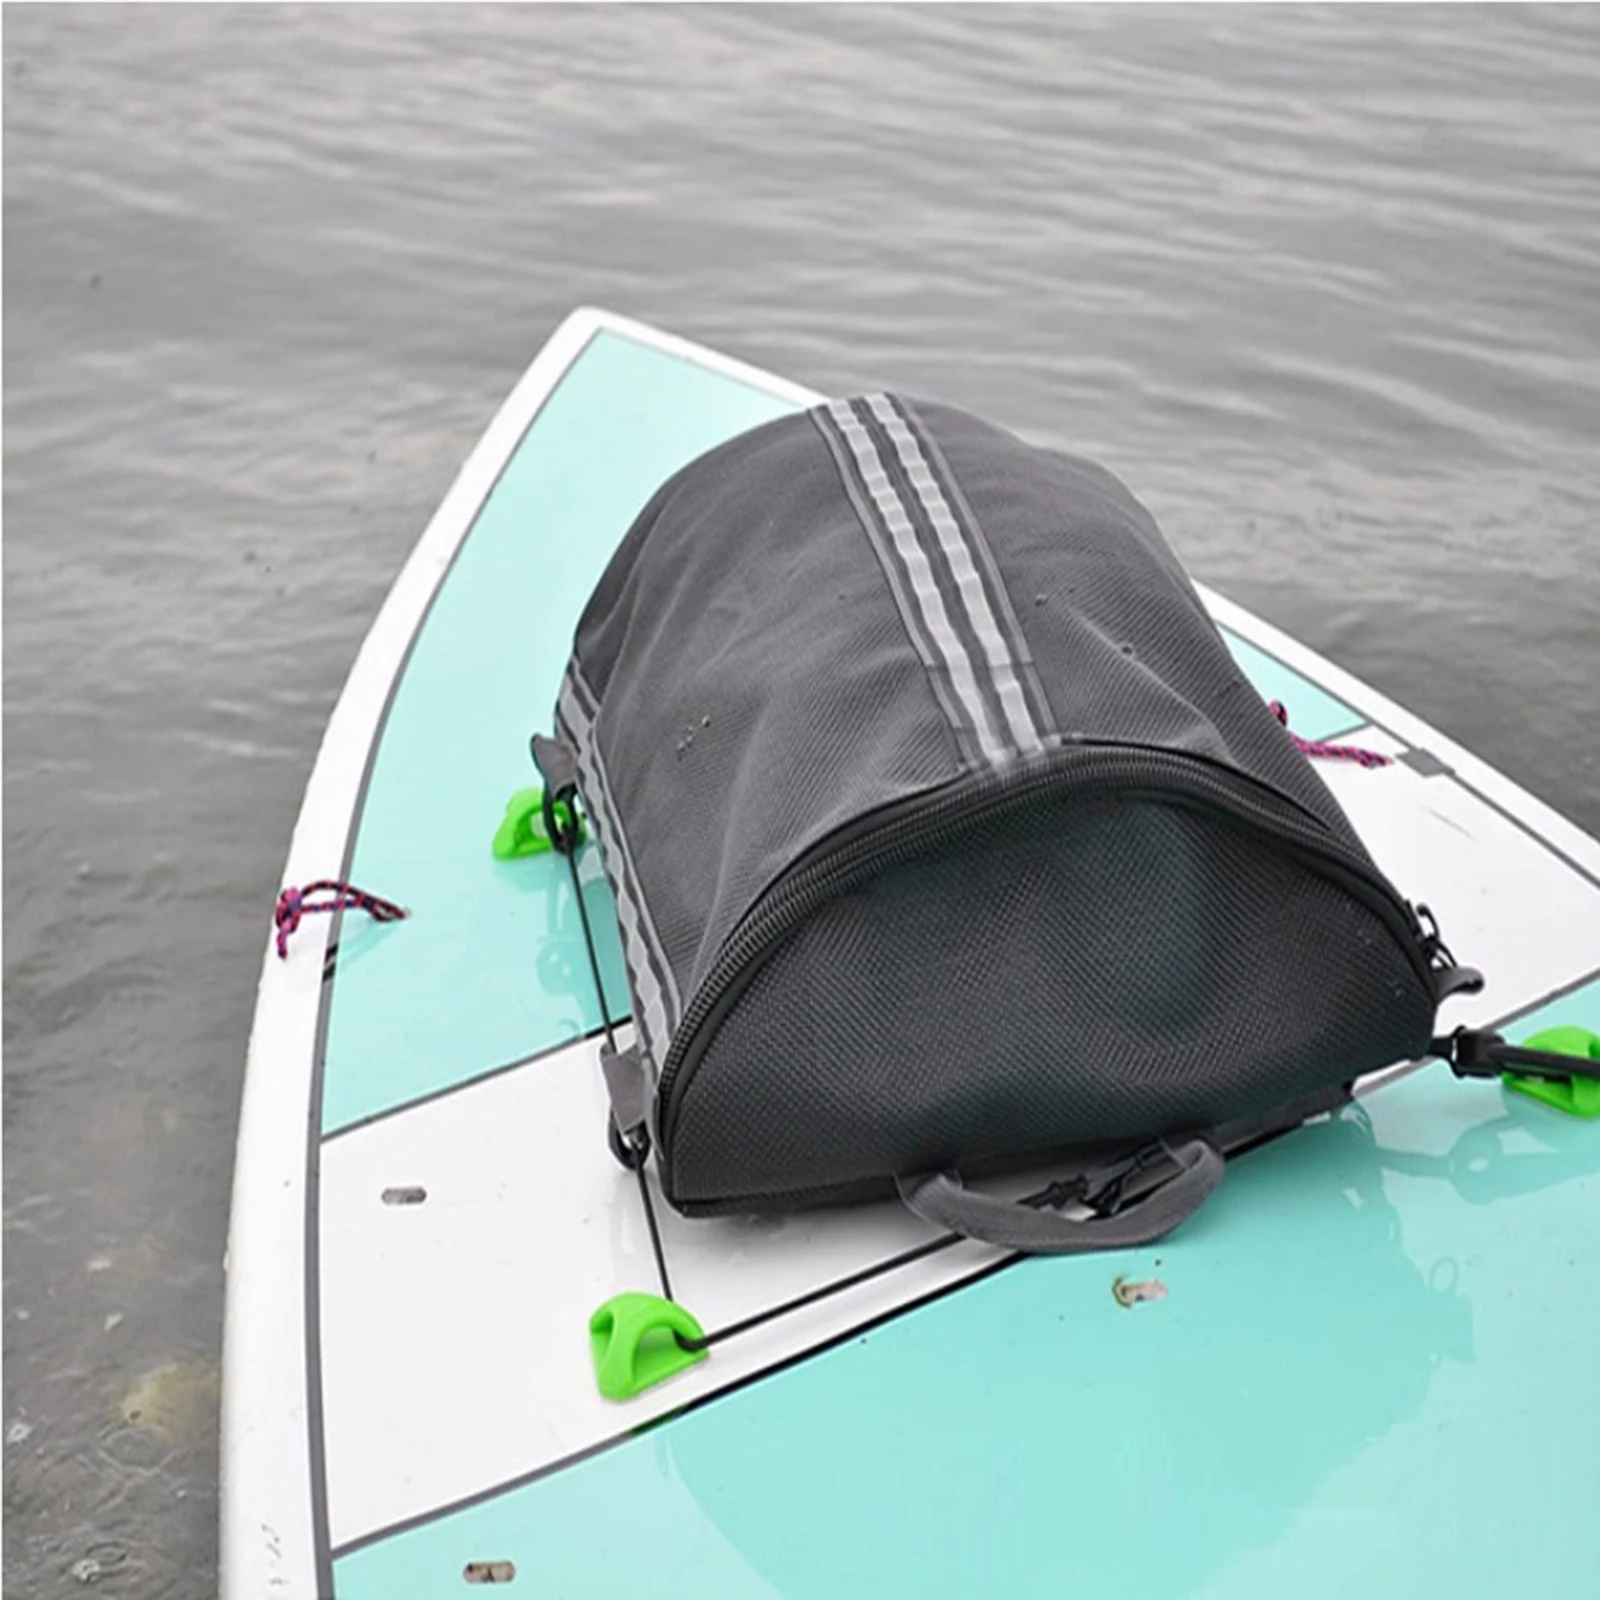 Portable Stand Up Paddle Deck Storage Bag for Inflatable Boat Rafting 